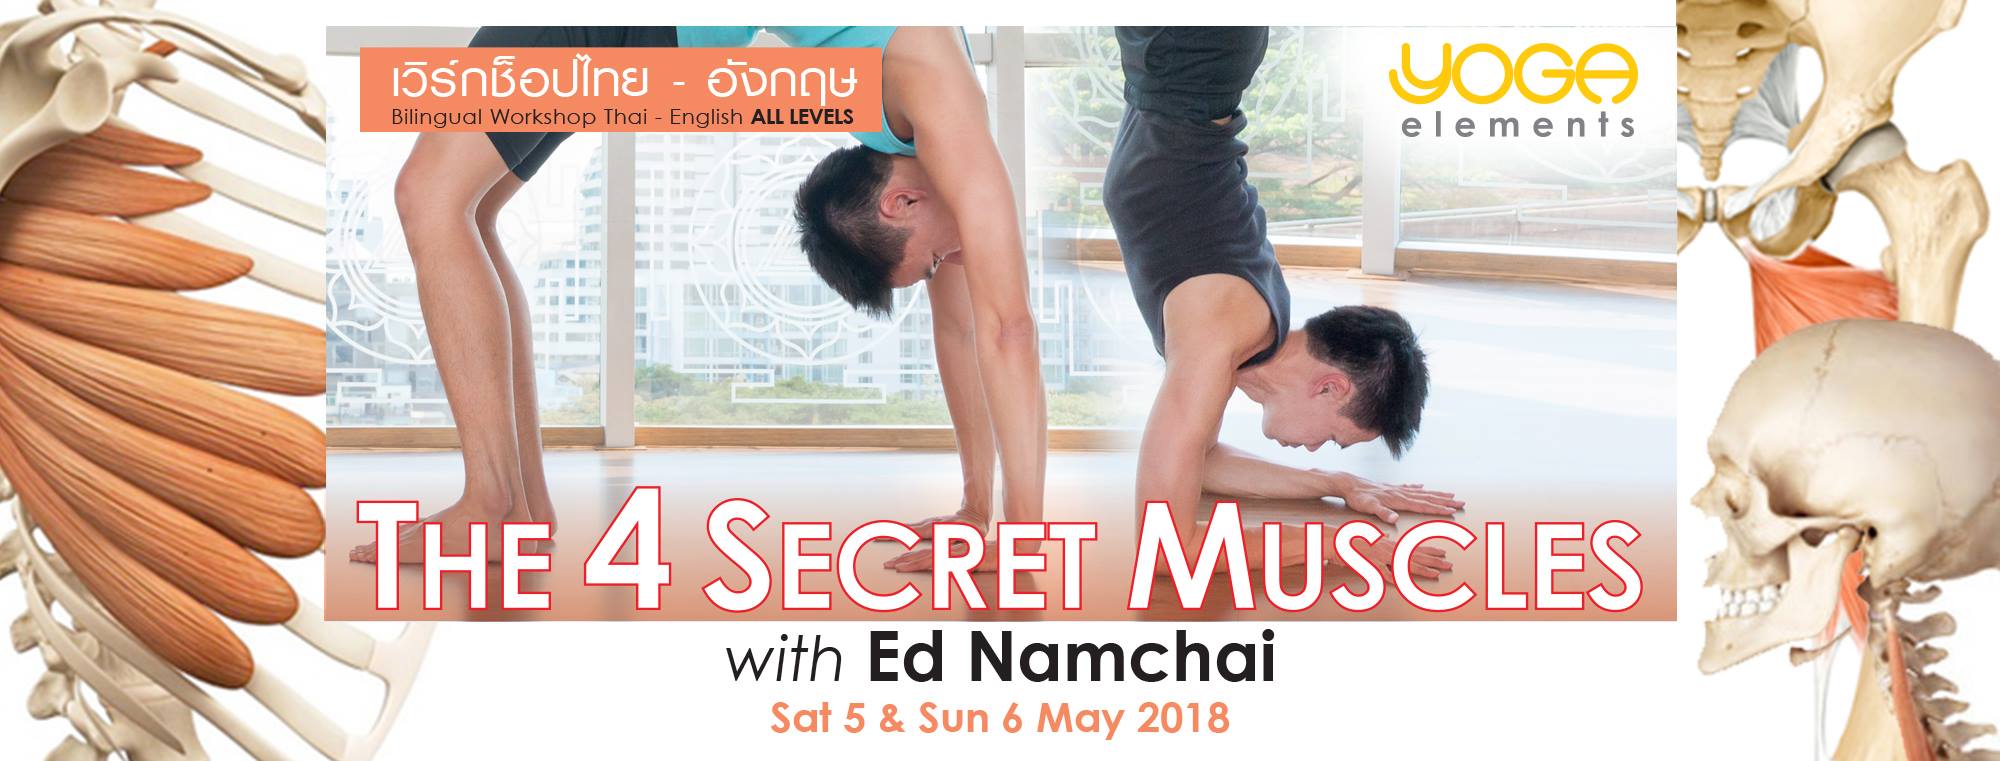 The 4 Secret Muscles with Ed Namchai